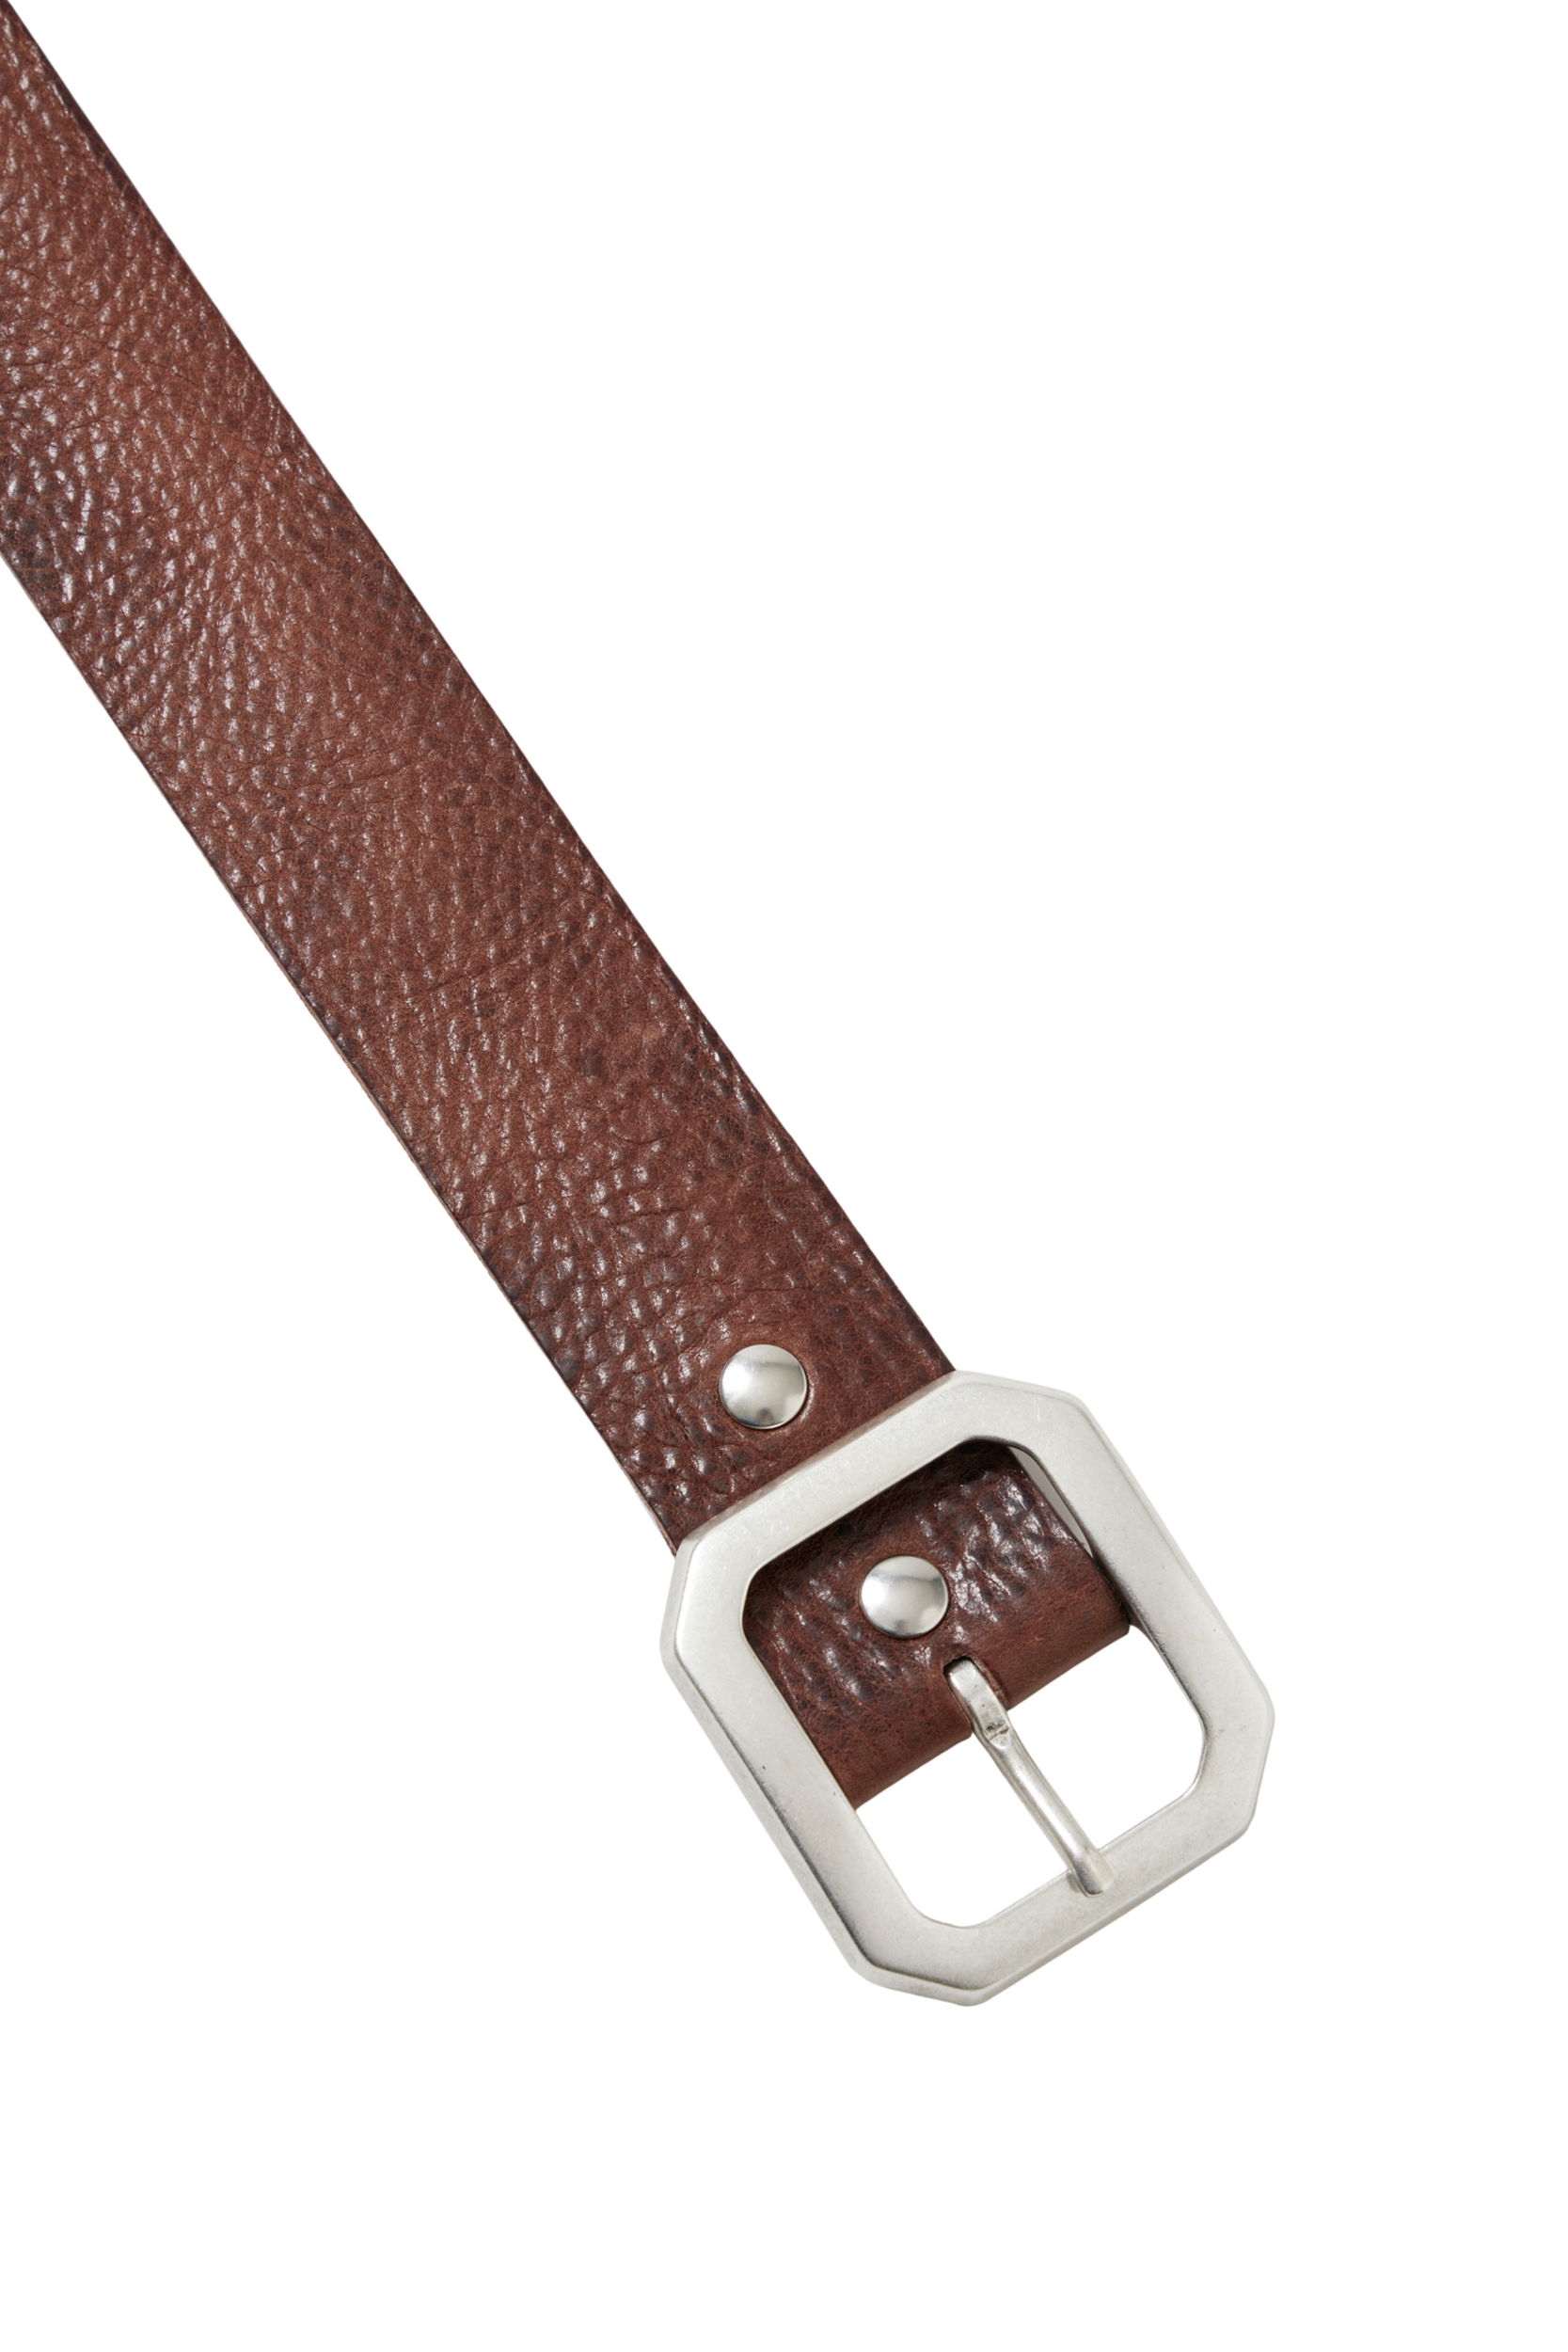 Hardin 40mm Brown Leather Belt with Removable Octagonal Buckle - Barbanera